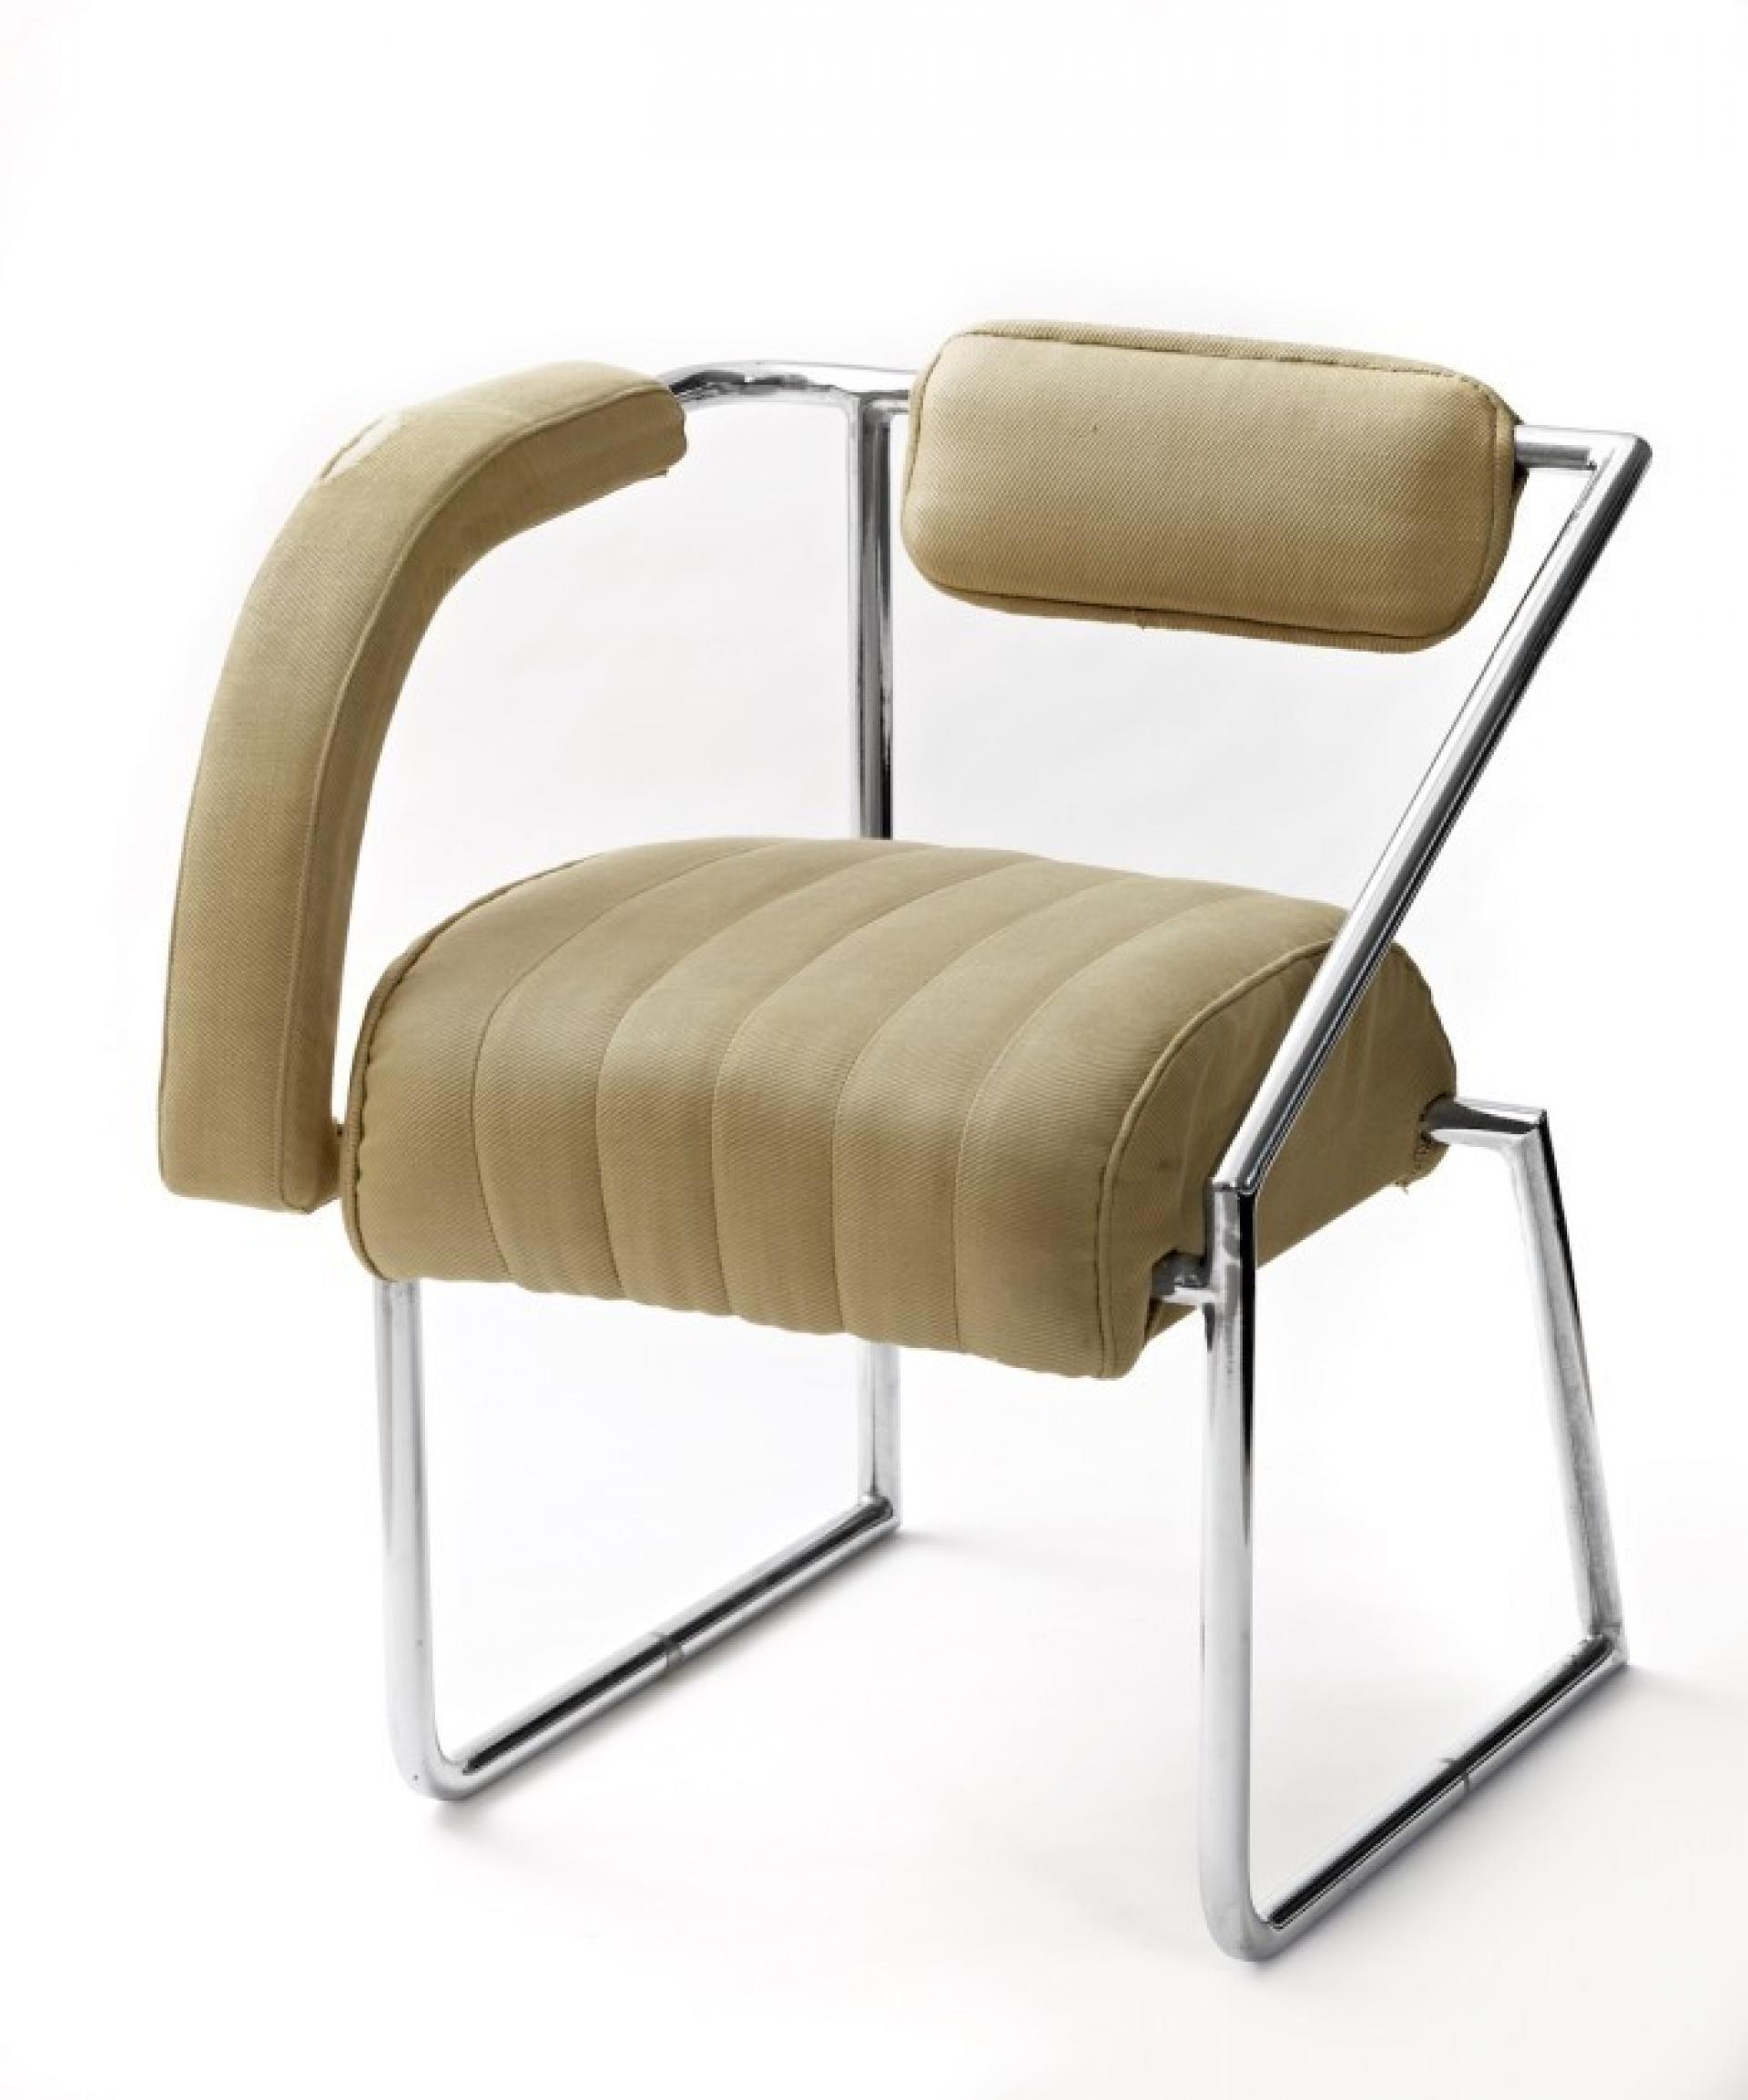 Cap Moderne hope to re-create the Non-conformist chair; Eileen designed it with one curved upholstered armrest, the other simply a slanted nickel-plated steel tube. | Photo © National Museum of Ireland